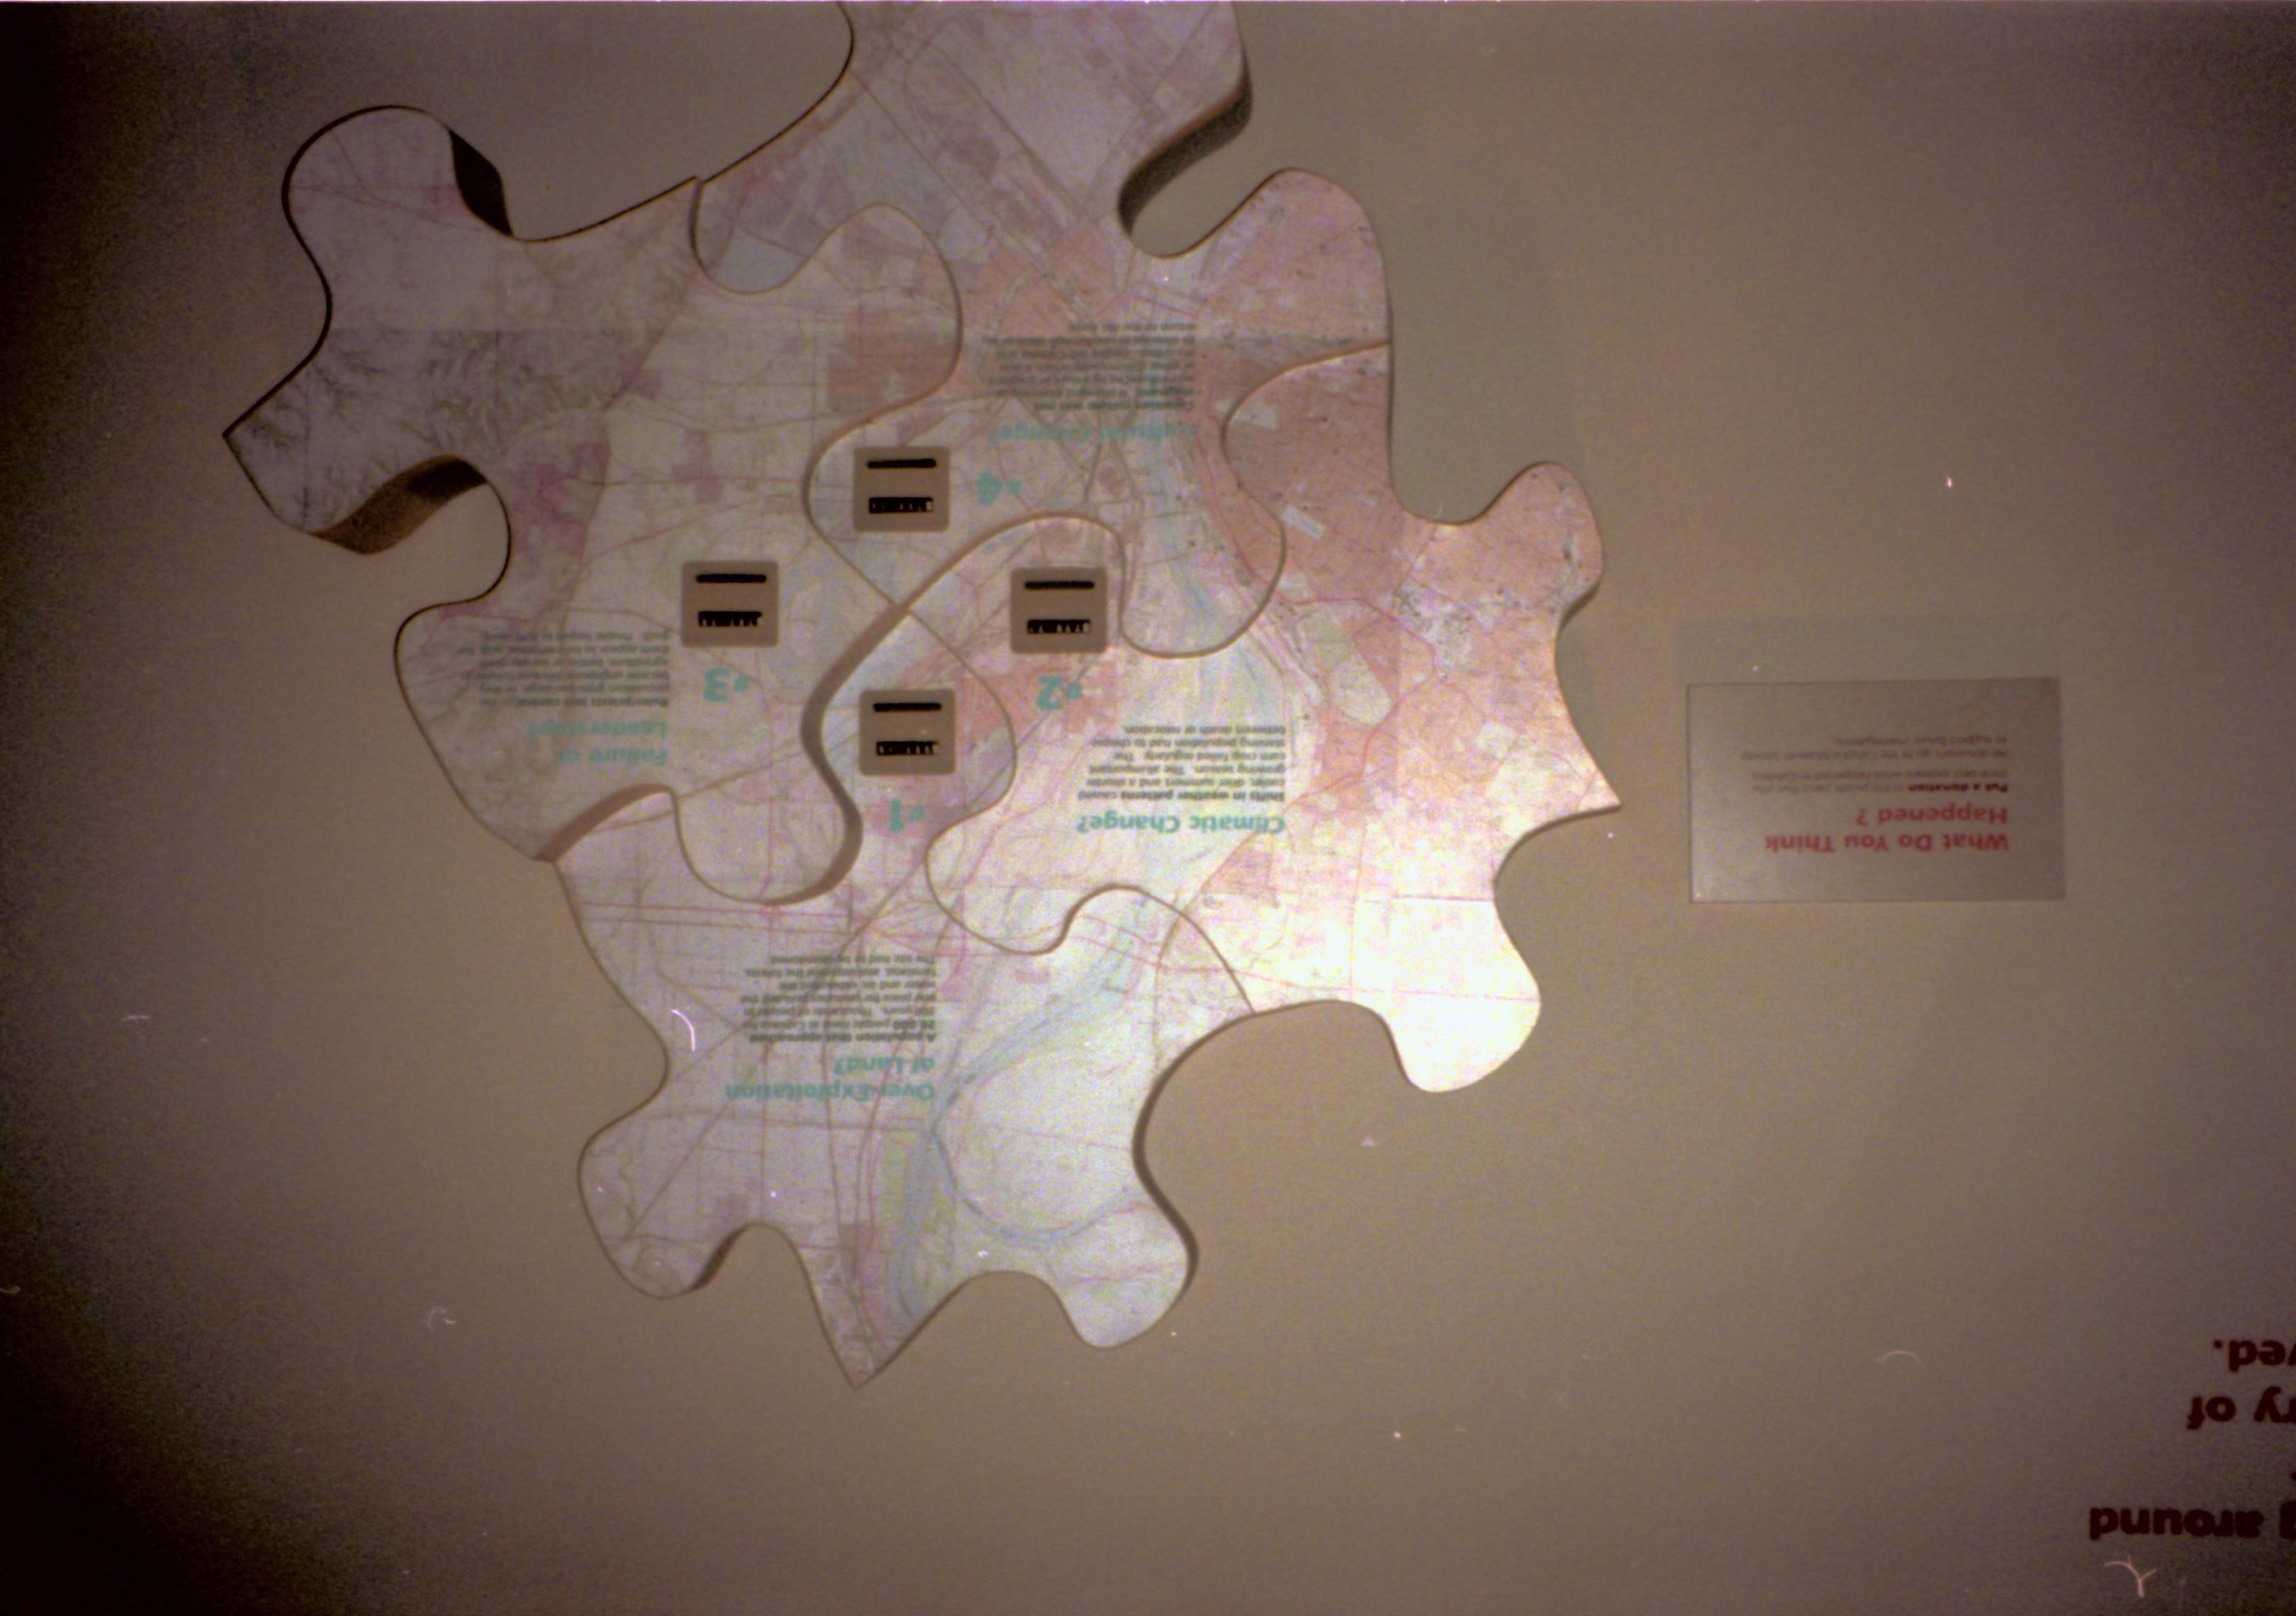 NA neg. sleeve(LIHO Door, Clock, Cahokia Mnds., Natl Portrait Gallery) Lincoln, artifacts, Cahokia, map, puzzle, climate change